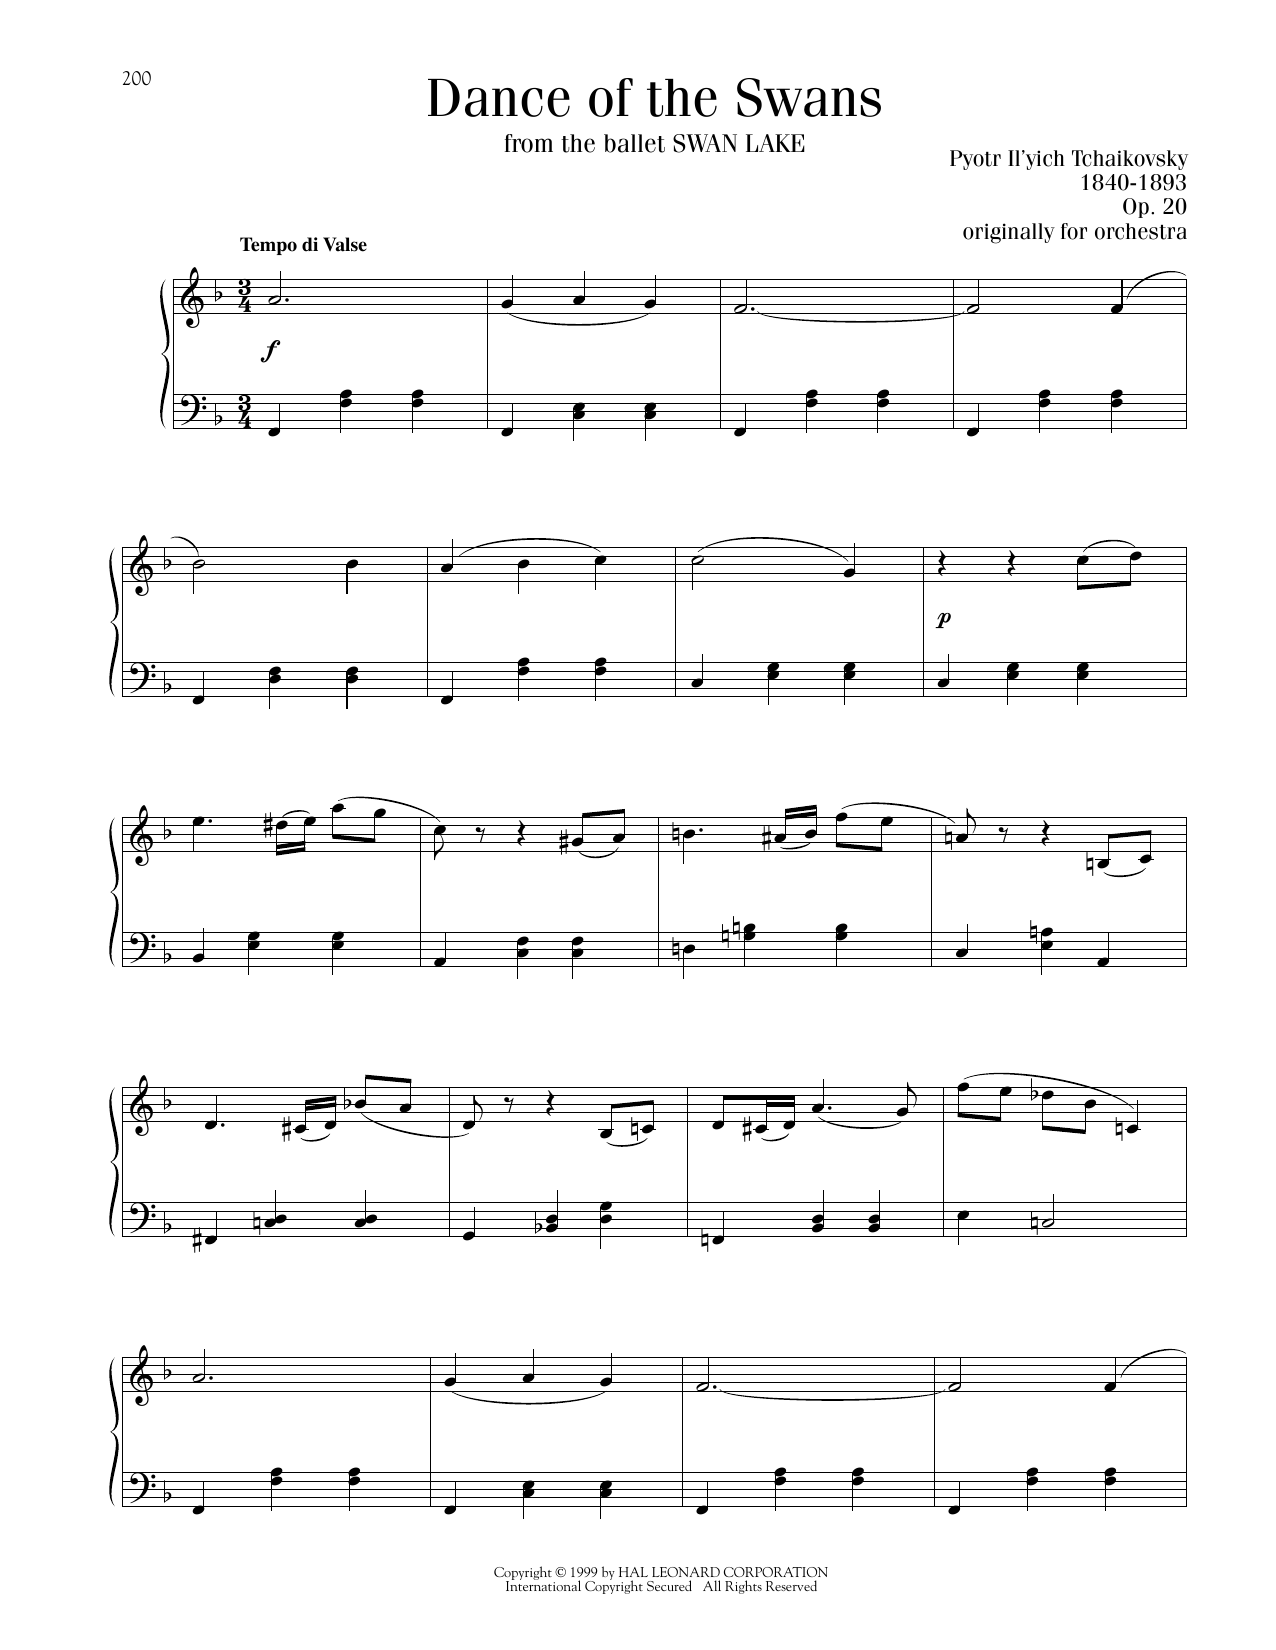 Pyotr Il'yich Tchaikovsky Dance Of The Swans sheet music notes printable PDF score